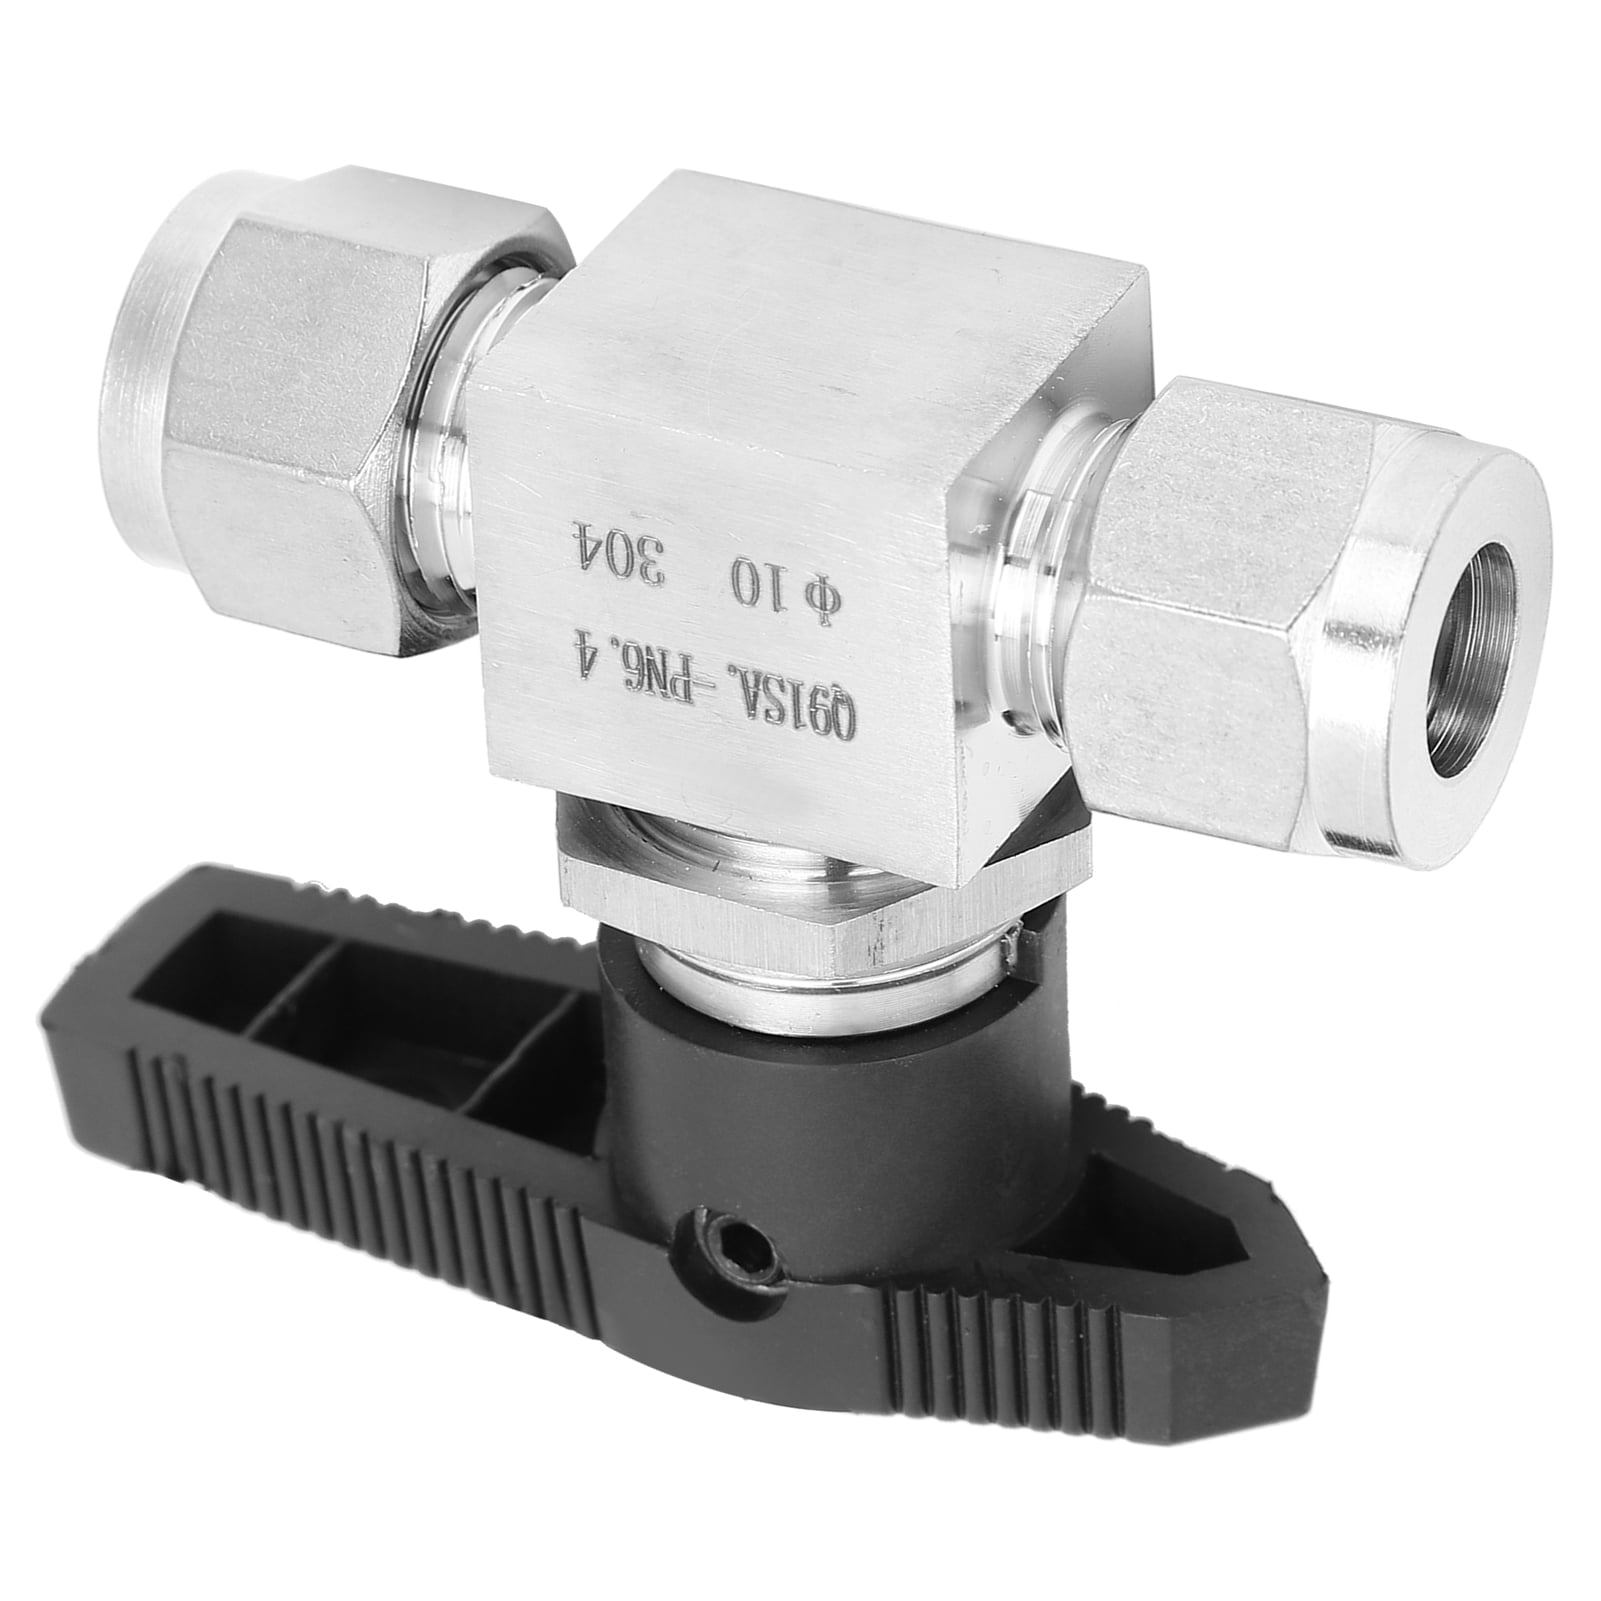 Strong Connection Smooth 930Psi Delicate SS‑44S6 Needle Valve Ф10 304 Stainless Steel Valve for Water Gas Oil Automobile And Shipbuilding Industry 